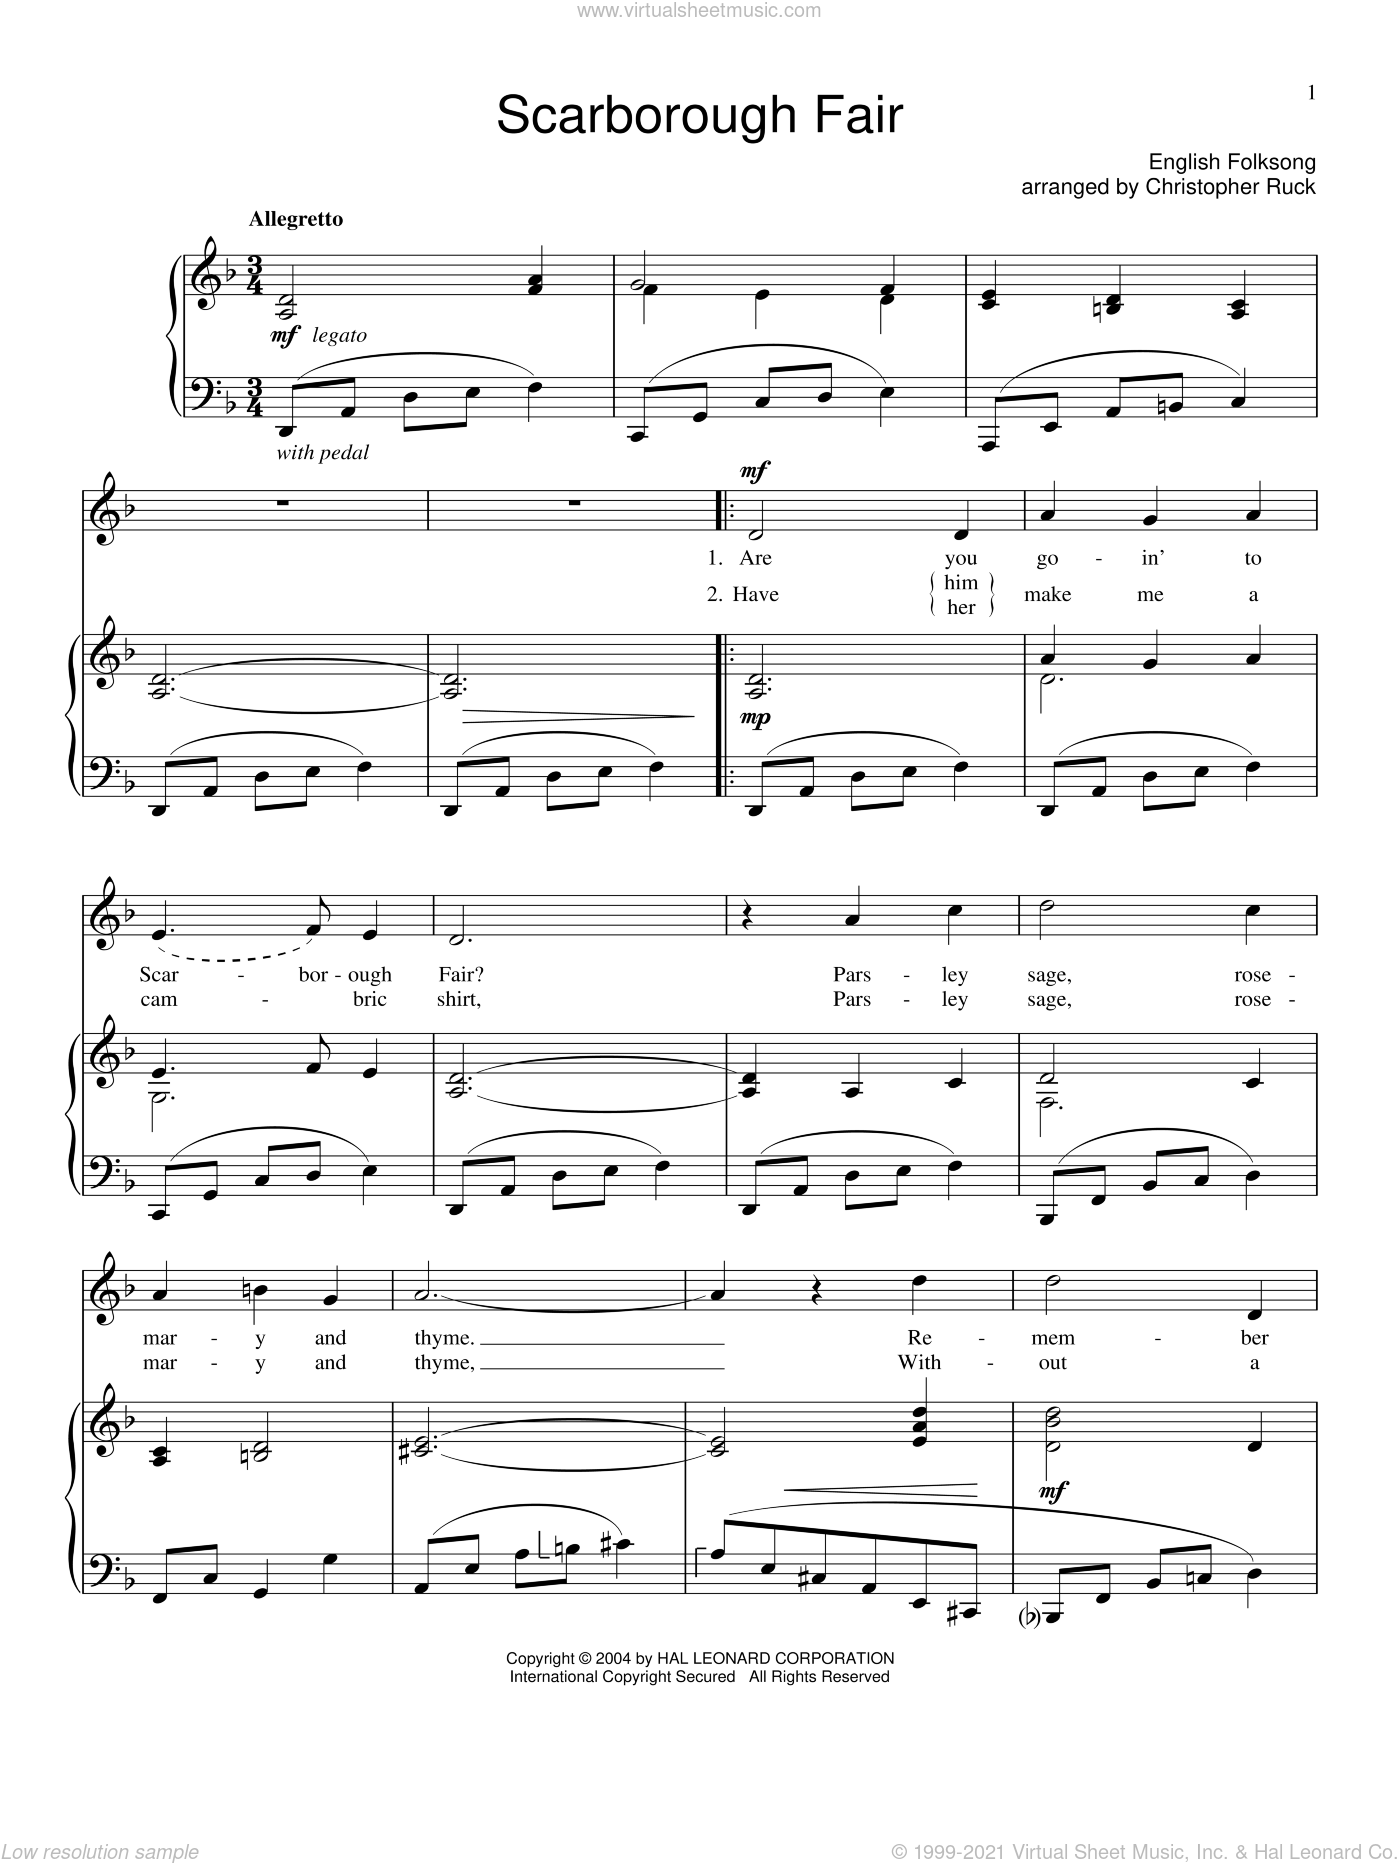 Ballad - Scarborough Fair sheet music for voice and piano (PDF)